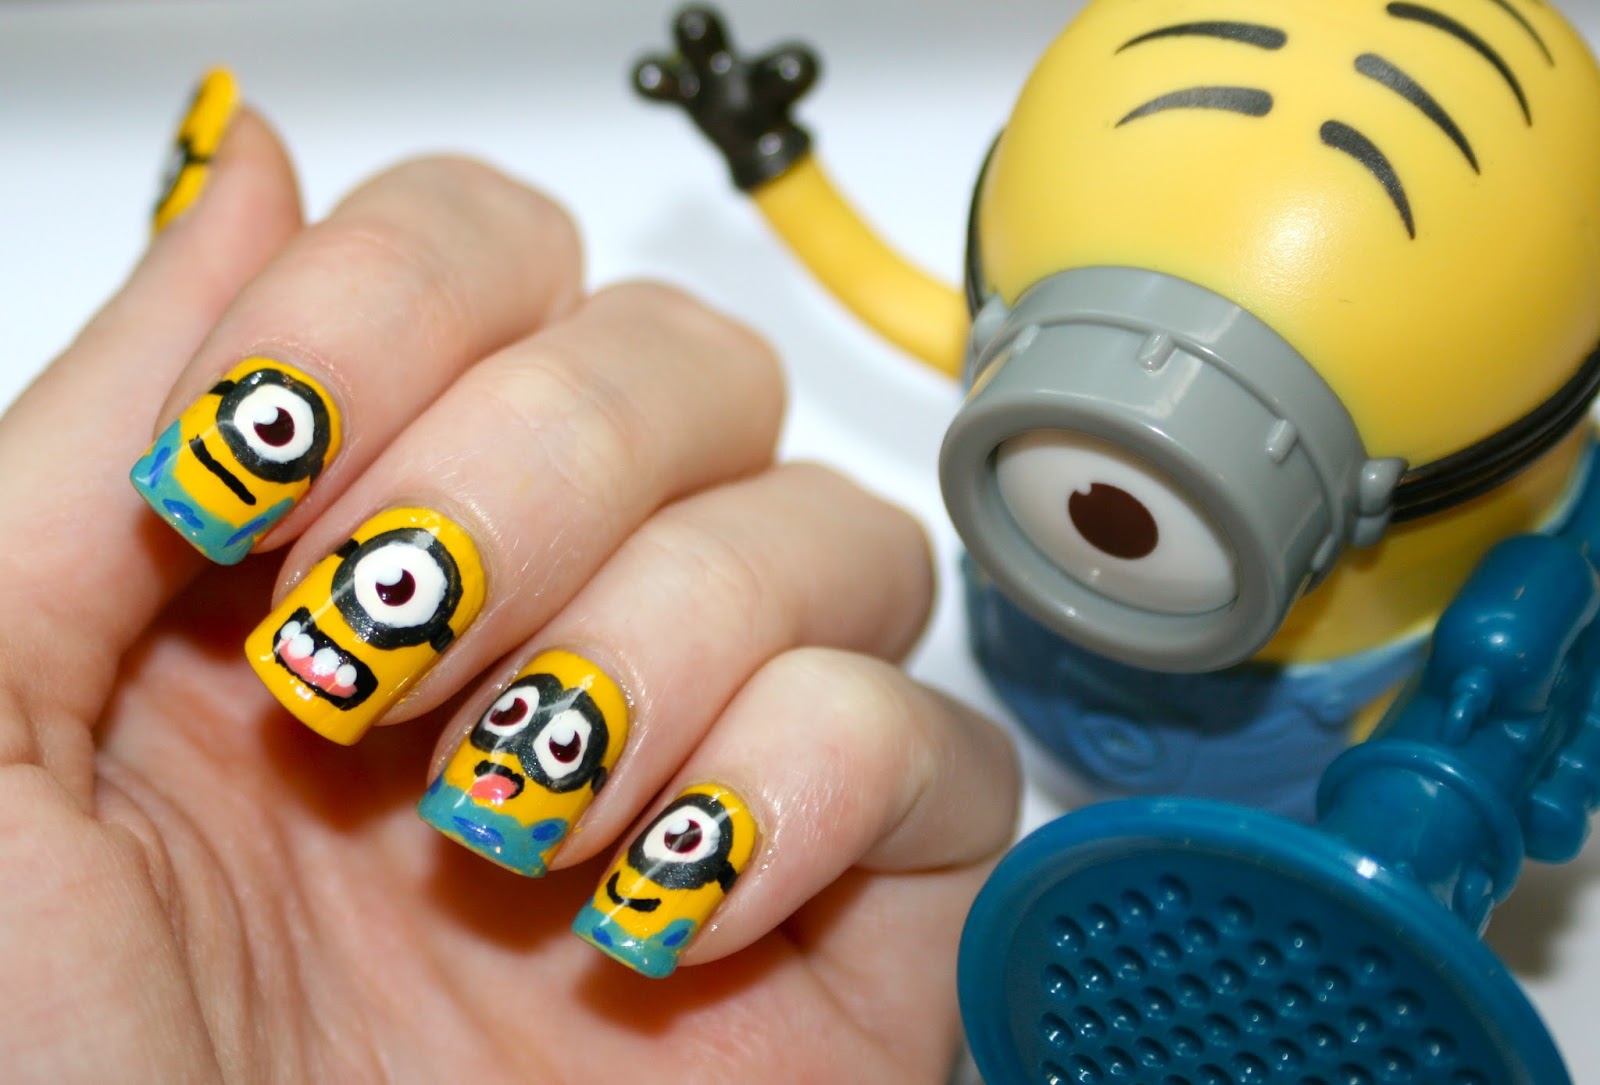 10. "Minion Nail Art with 3D Accents" by cutepolish - wide 7